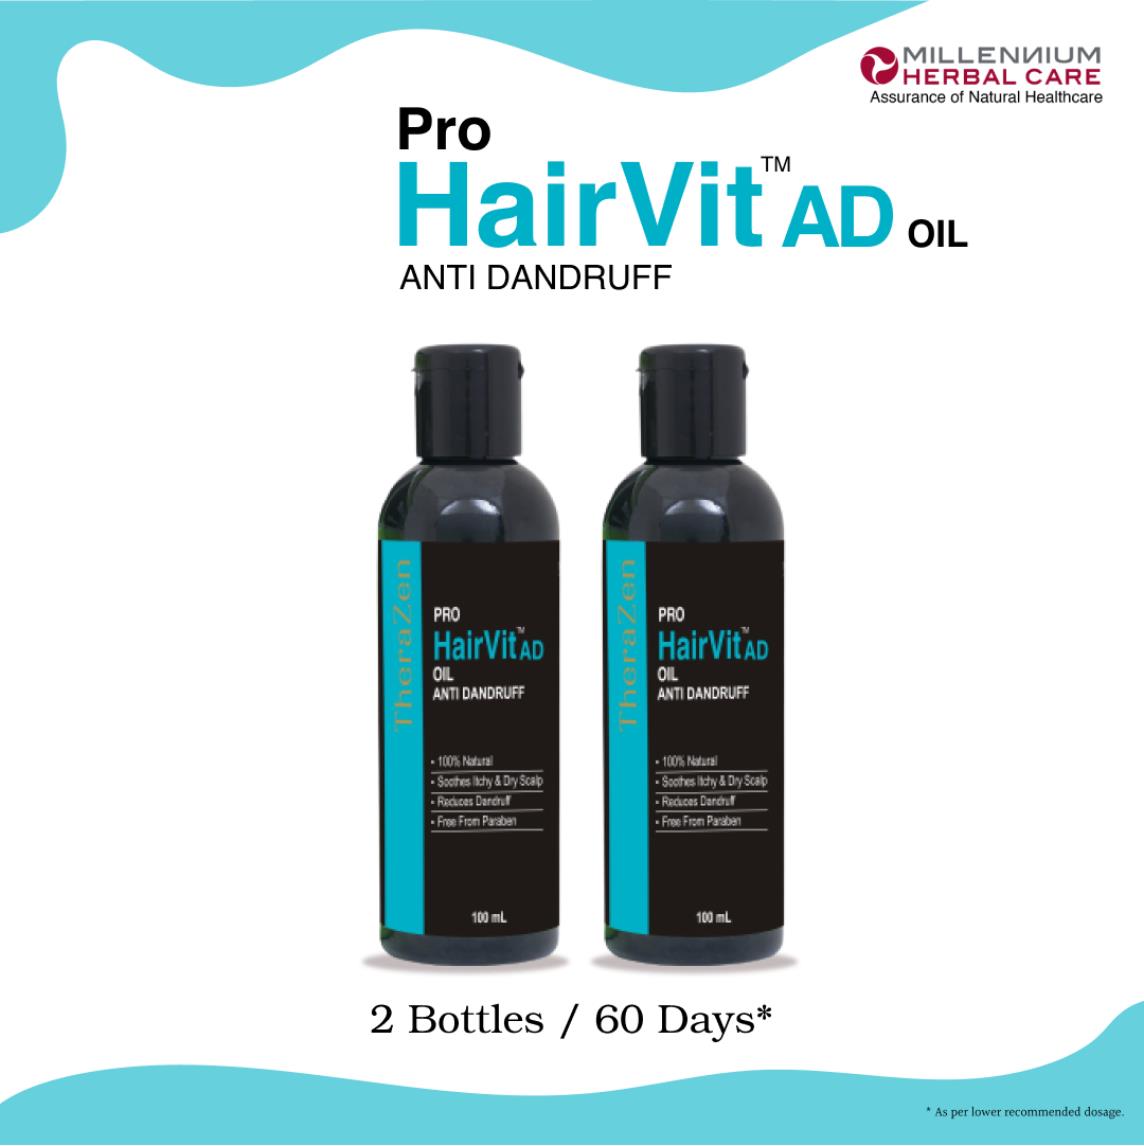 Pro Hairvit AD Oil Front Image